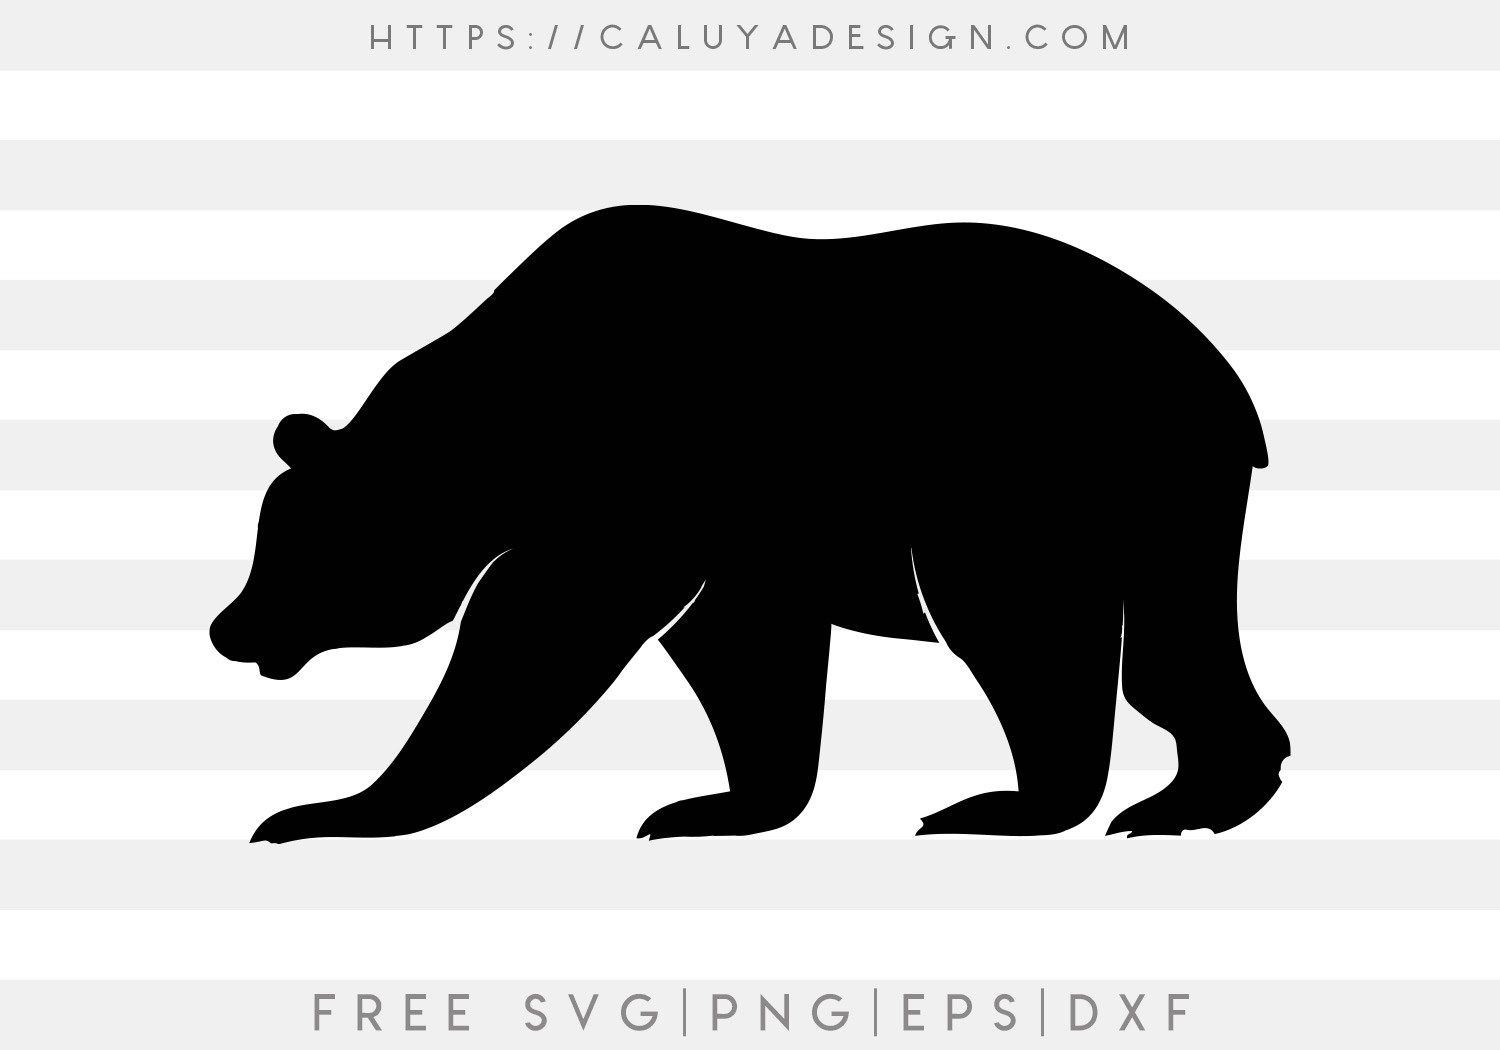 Free Bear SVG, PNG, EPS & DXF by Caluya Design